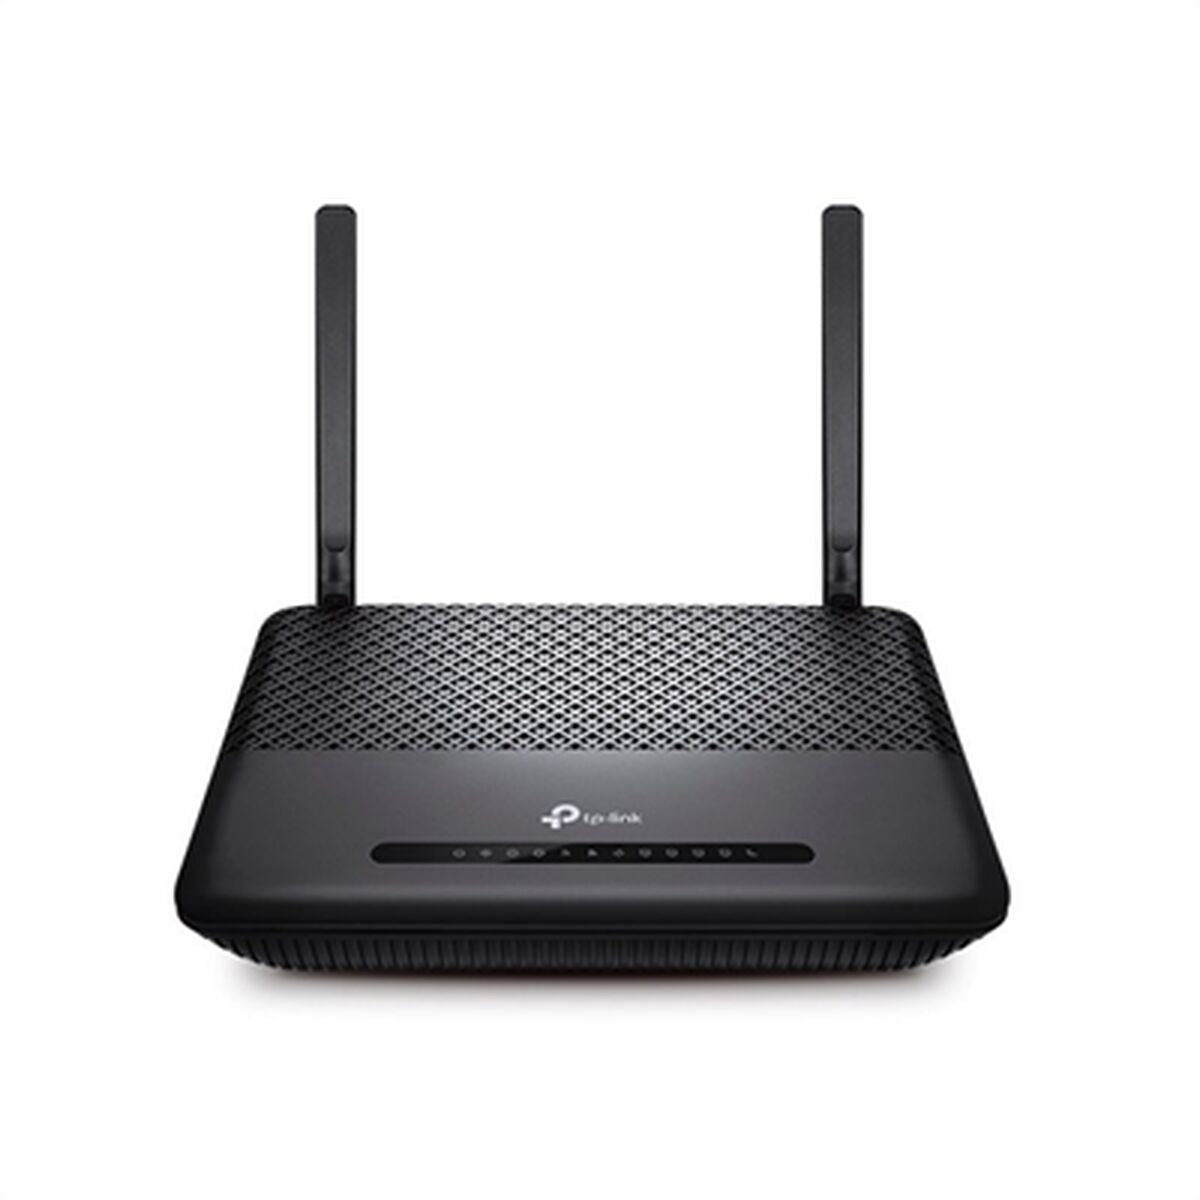 Router TP-Link XC220-G3v, TP-Link, Computing, Network devices, router-tp-link-xc220-g3v, Brand_TP-Link, category-reference-2609, category-reference-2803, category-reference-2826, category-reference-t-19685, category-reference-t-19914, Condition_NEW, networks/wiring, Price_50 - 100, Teleworking, RiotNook